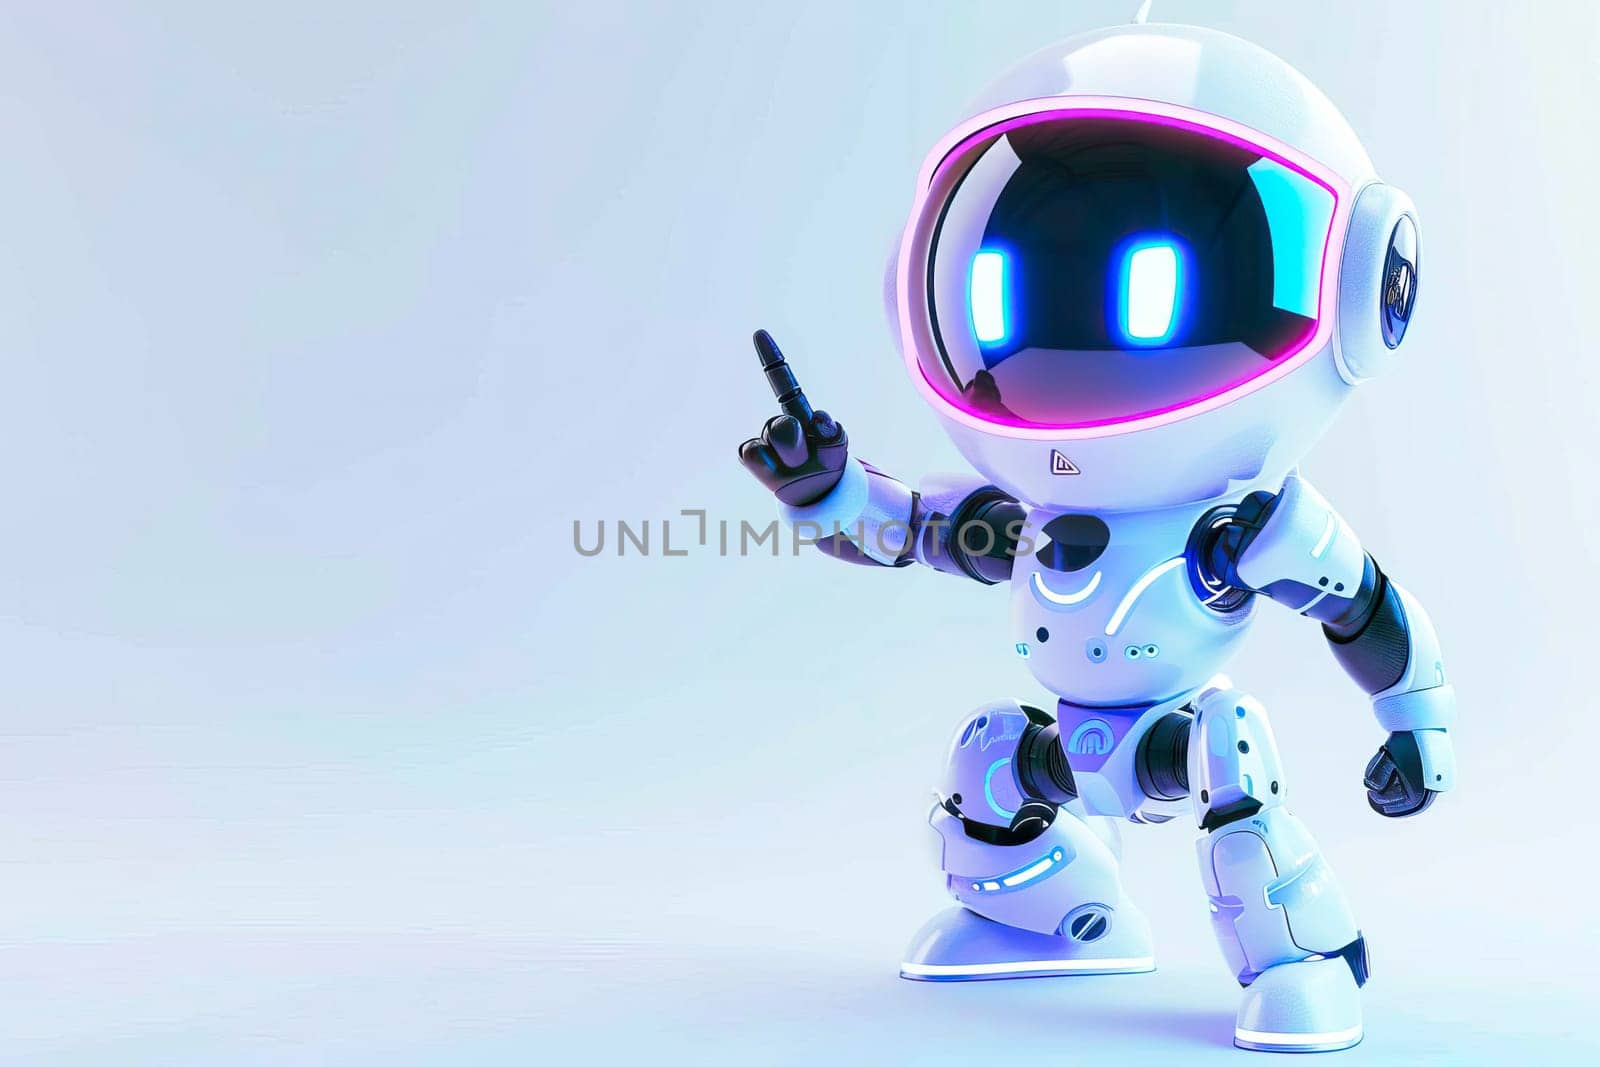 Robot is holding a cell phone, showcasing modern technology and artificial intelligence